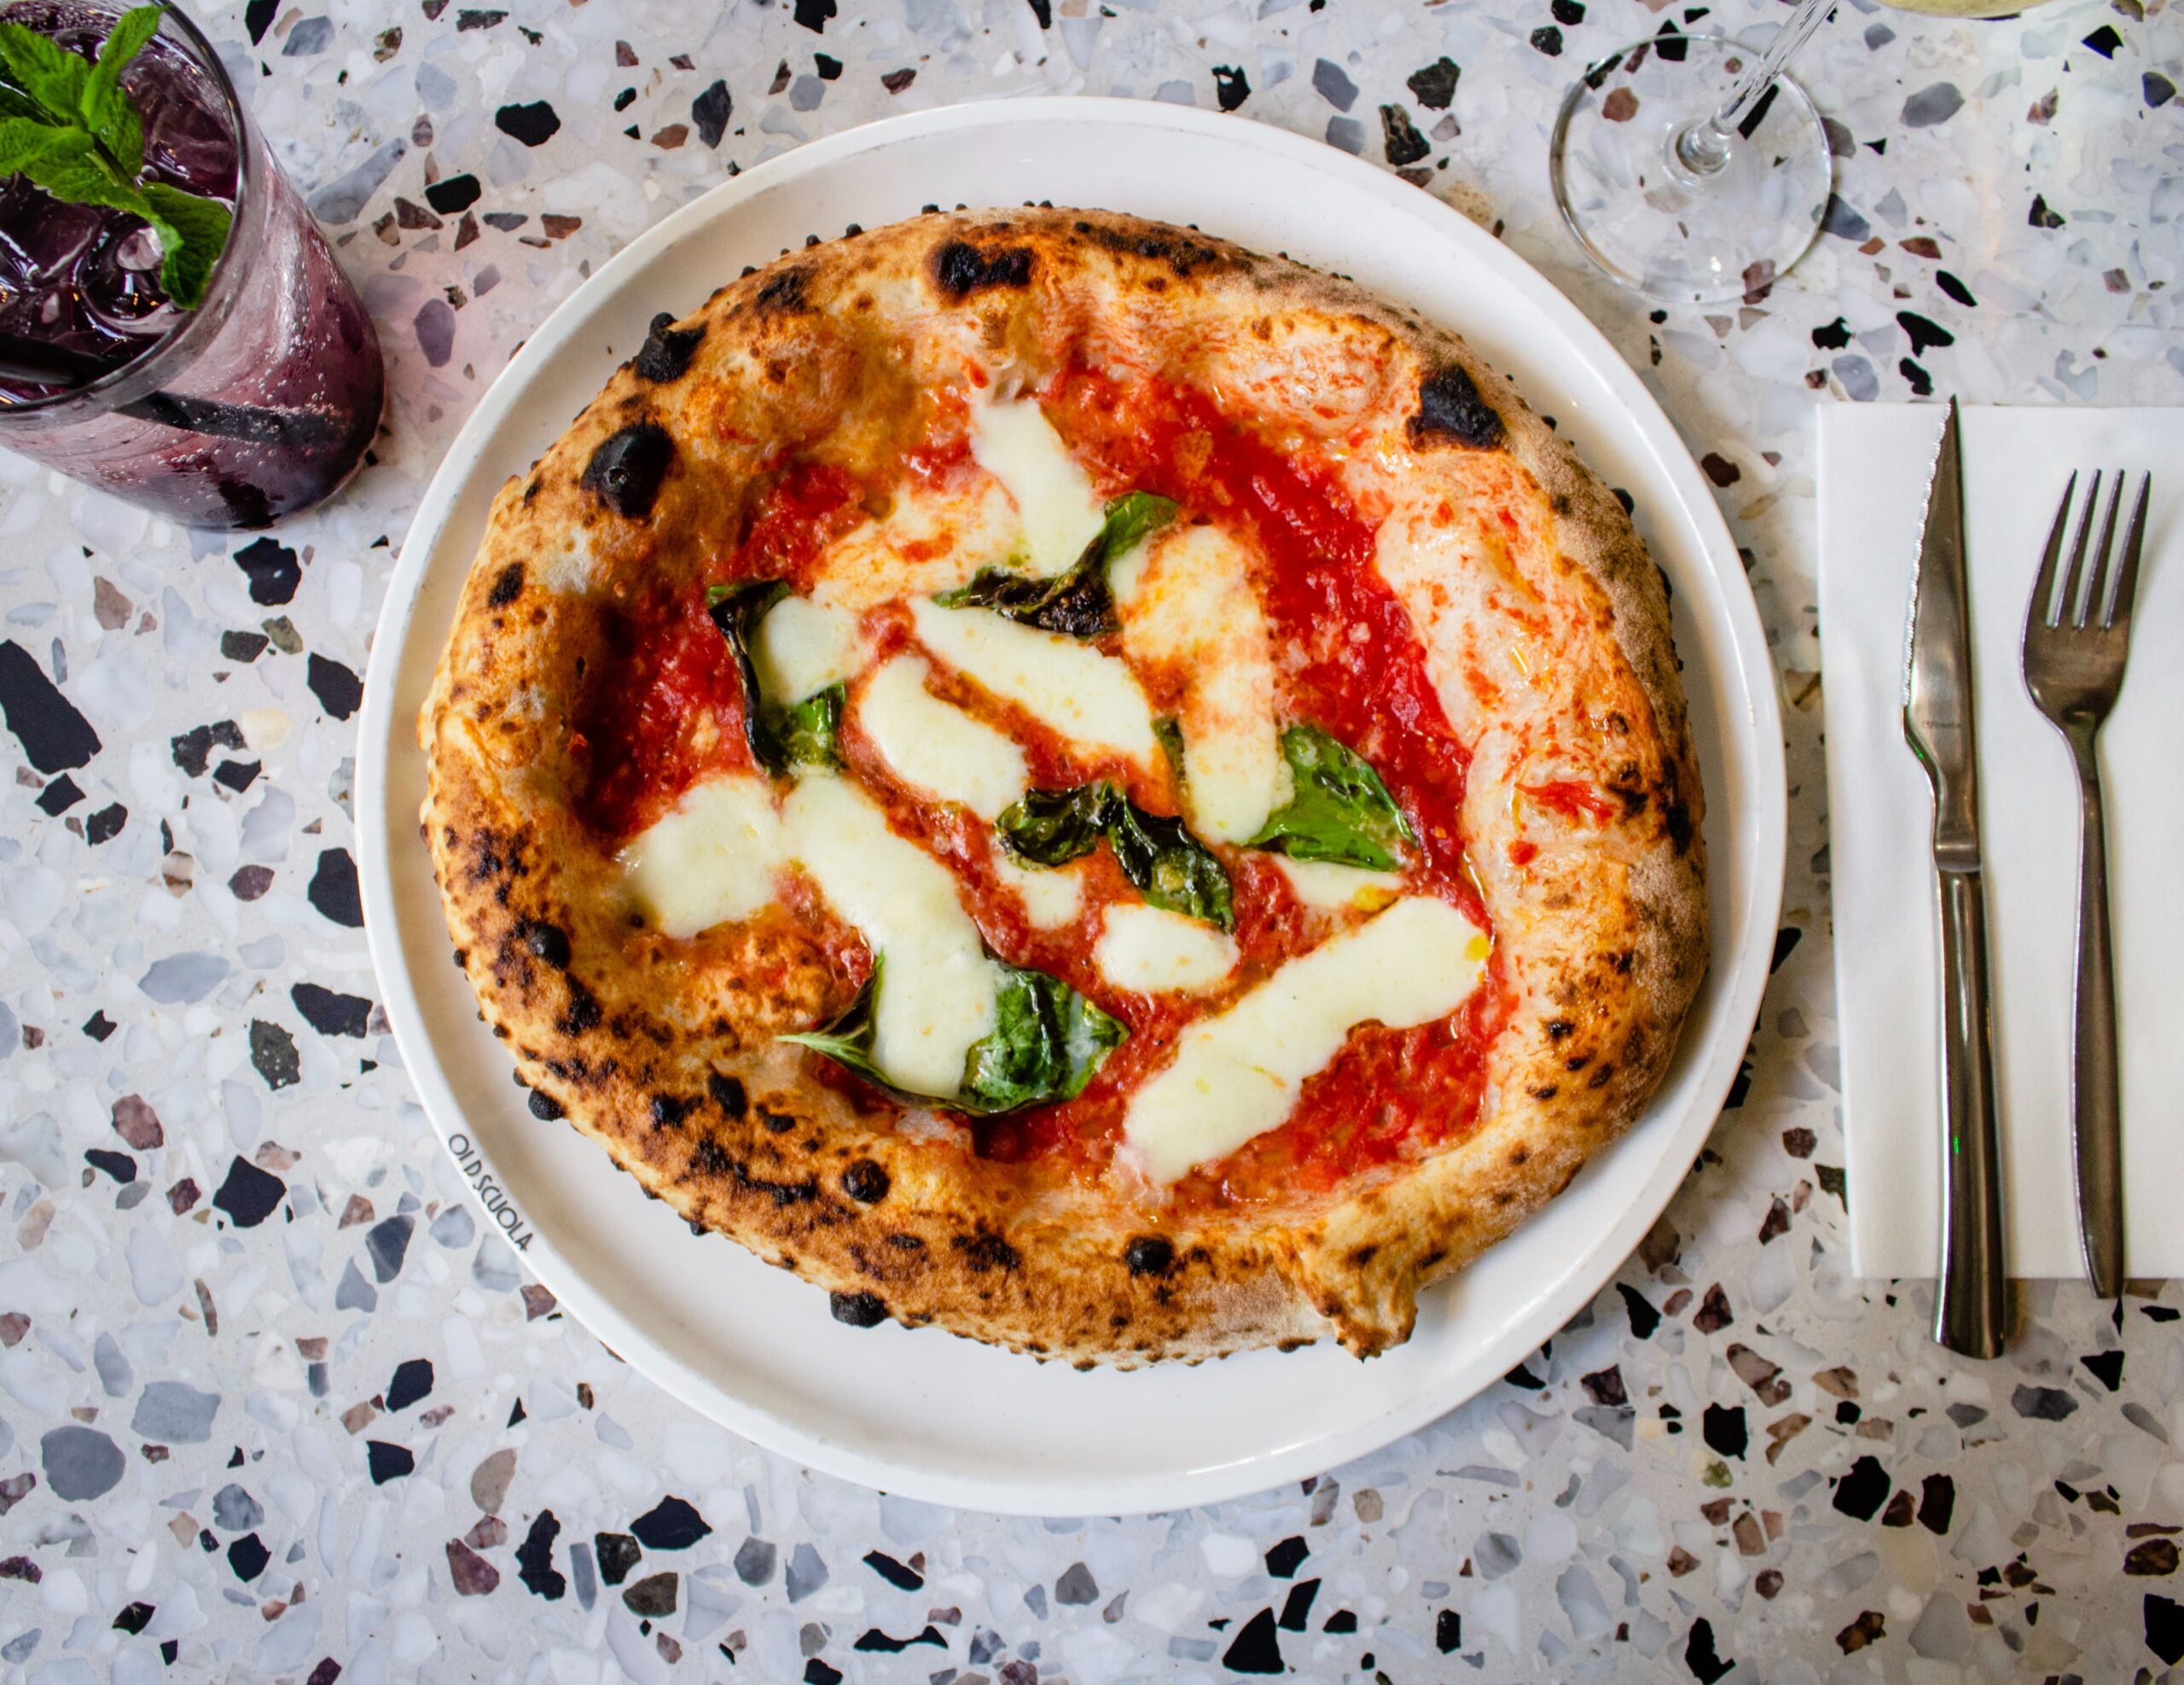 A Neapolitan pizza on a table, with a knife and a fork beside it